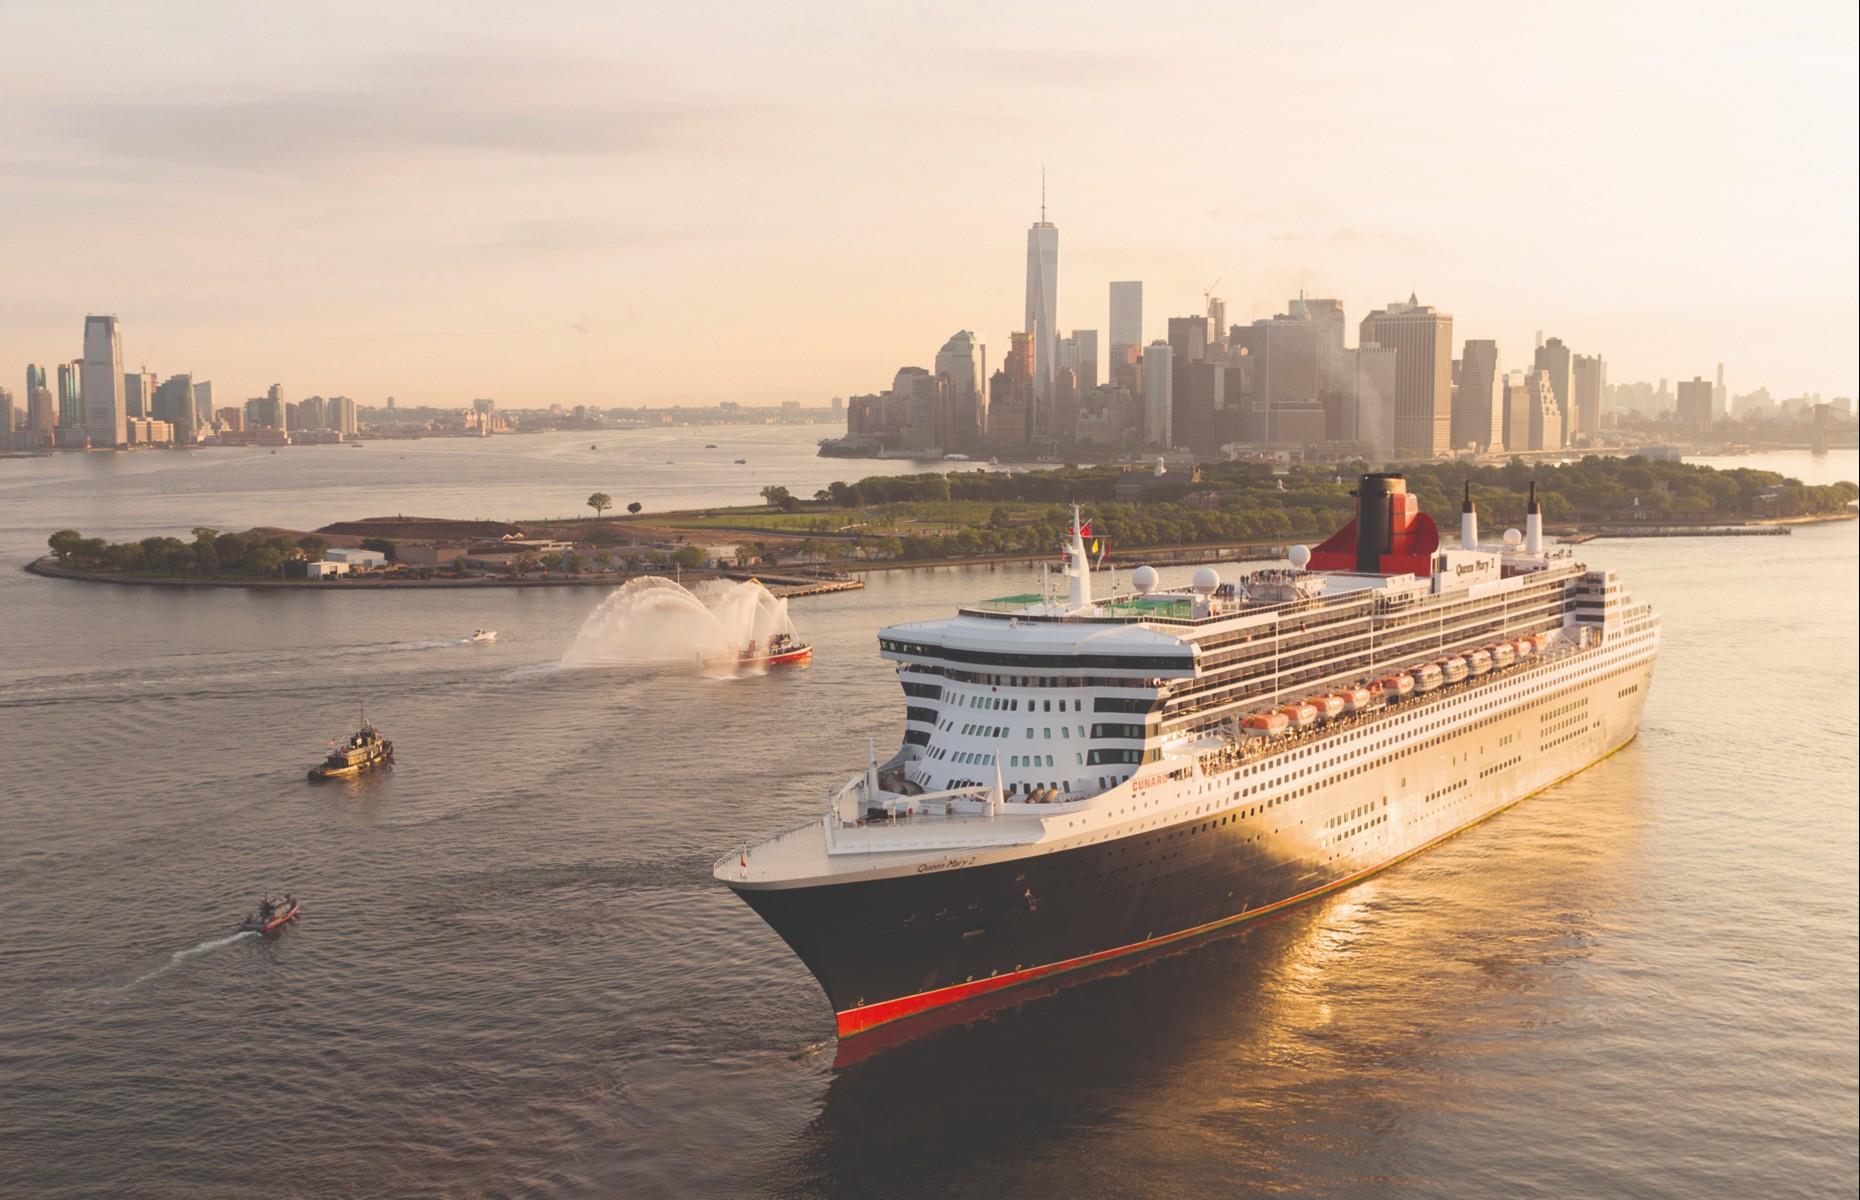 <p>Cunard’s flagship <a href="https://www.cunard.com/en-gb/cruise-ships/queen-mary-2/9">Queen Mary 2</a> exudes classic style and elegance. Designed by a team of British naval architects, the traditional ocean liner has a long, sleek bow that makes her ideal for transatlantic crossings. Its black hull, red stripe, distinctive red-and-black funnel crown and bright white decks evoke the appearance of ocean liners of a bygone era.</p>  <p><a href="https://www.loveexploring.com/galleries/104011/incredible-images-of-cruising-through-the-ages?page=1"><strong>Take a look at these nostalgic images of cruising through the ages</strong></a></p>